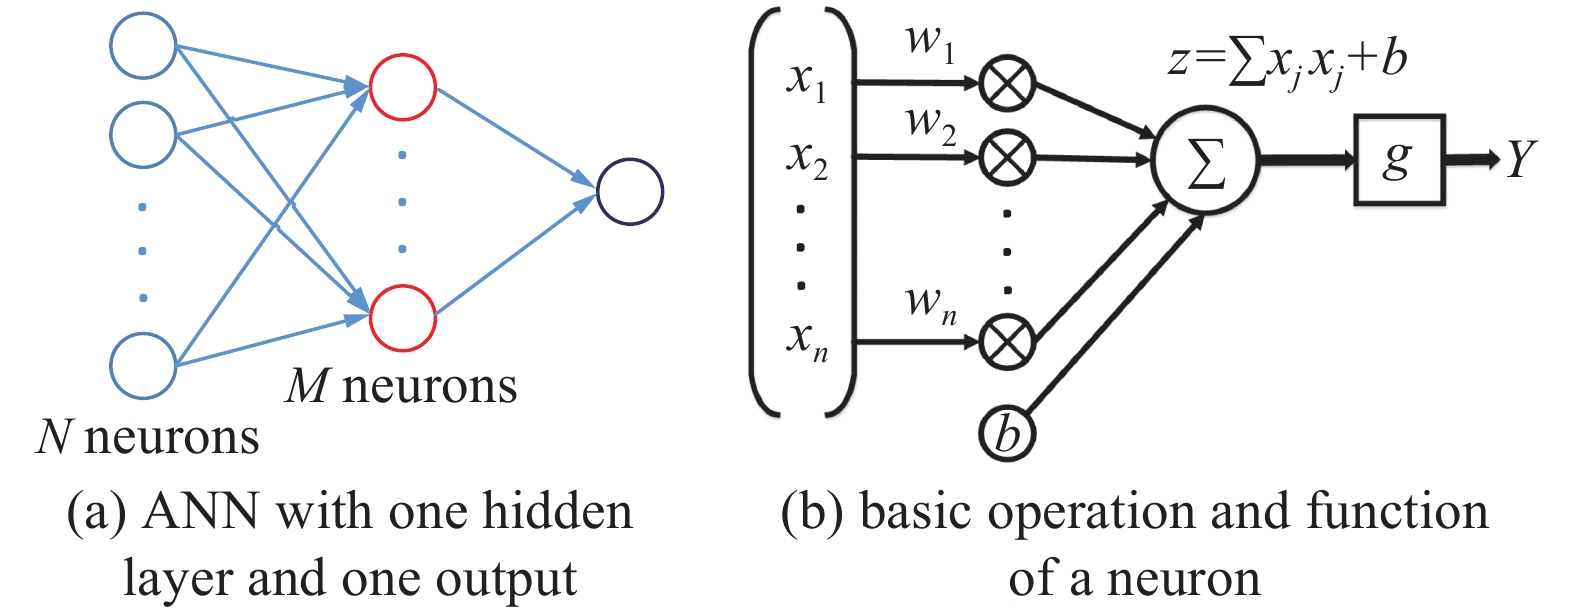 ANN and the basic operation of a neuron